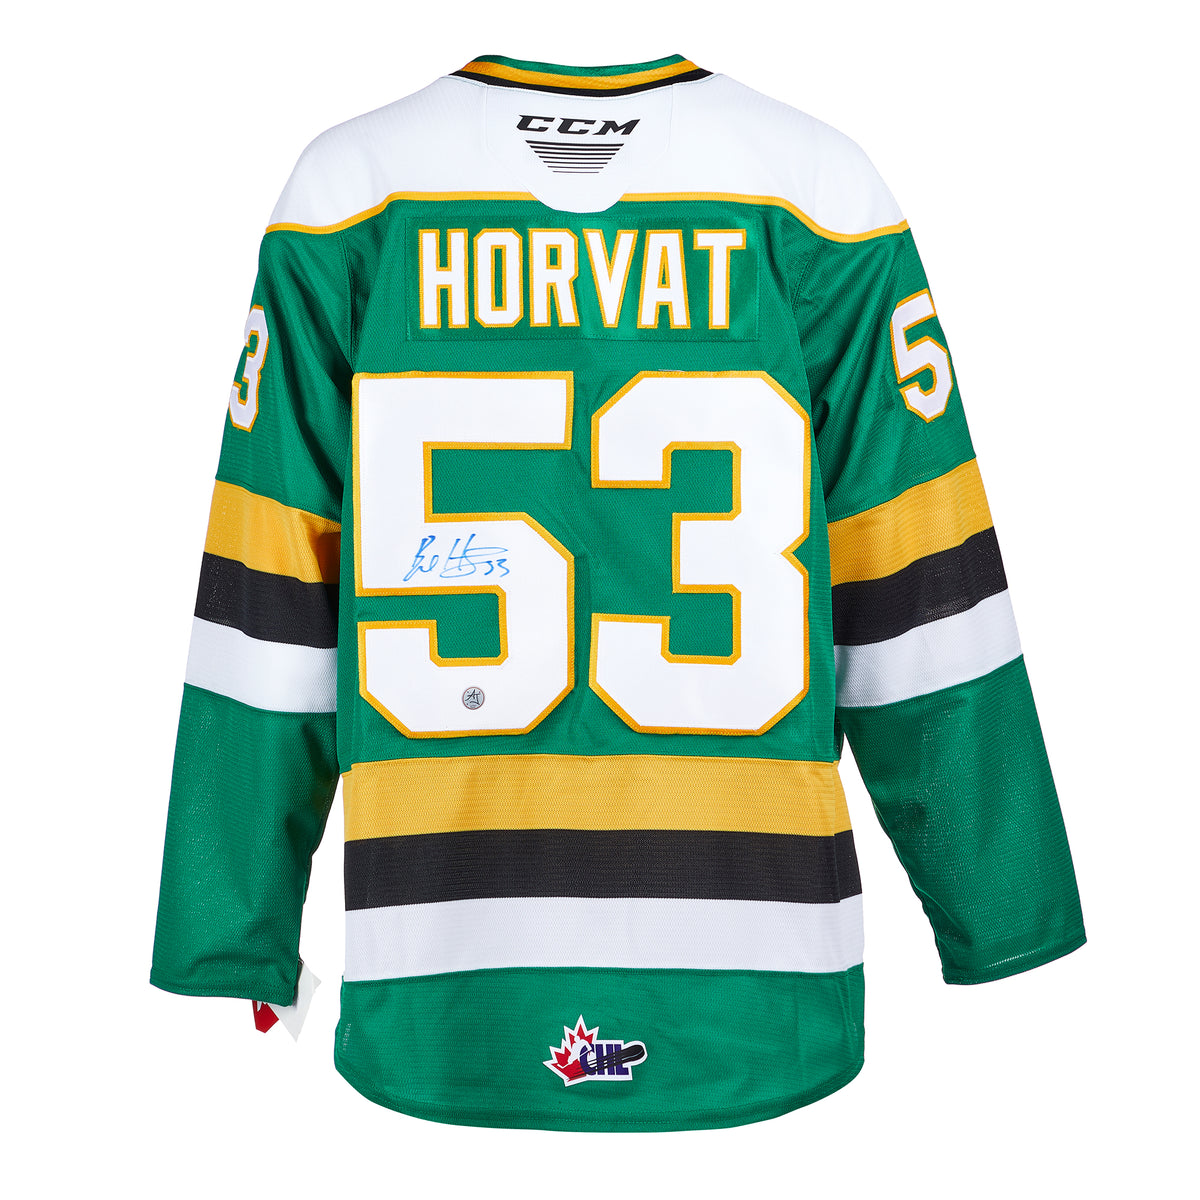 C26 Nik1 Custom BO HORVAT Cheap LONDON KNIGHTS OHL THIRD CCM JERSEY Stitch  Add Any Number Any Name Mens Hockey Jersey XS 6XL From C2604, $20.77